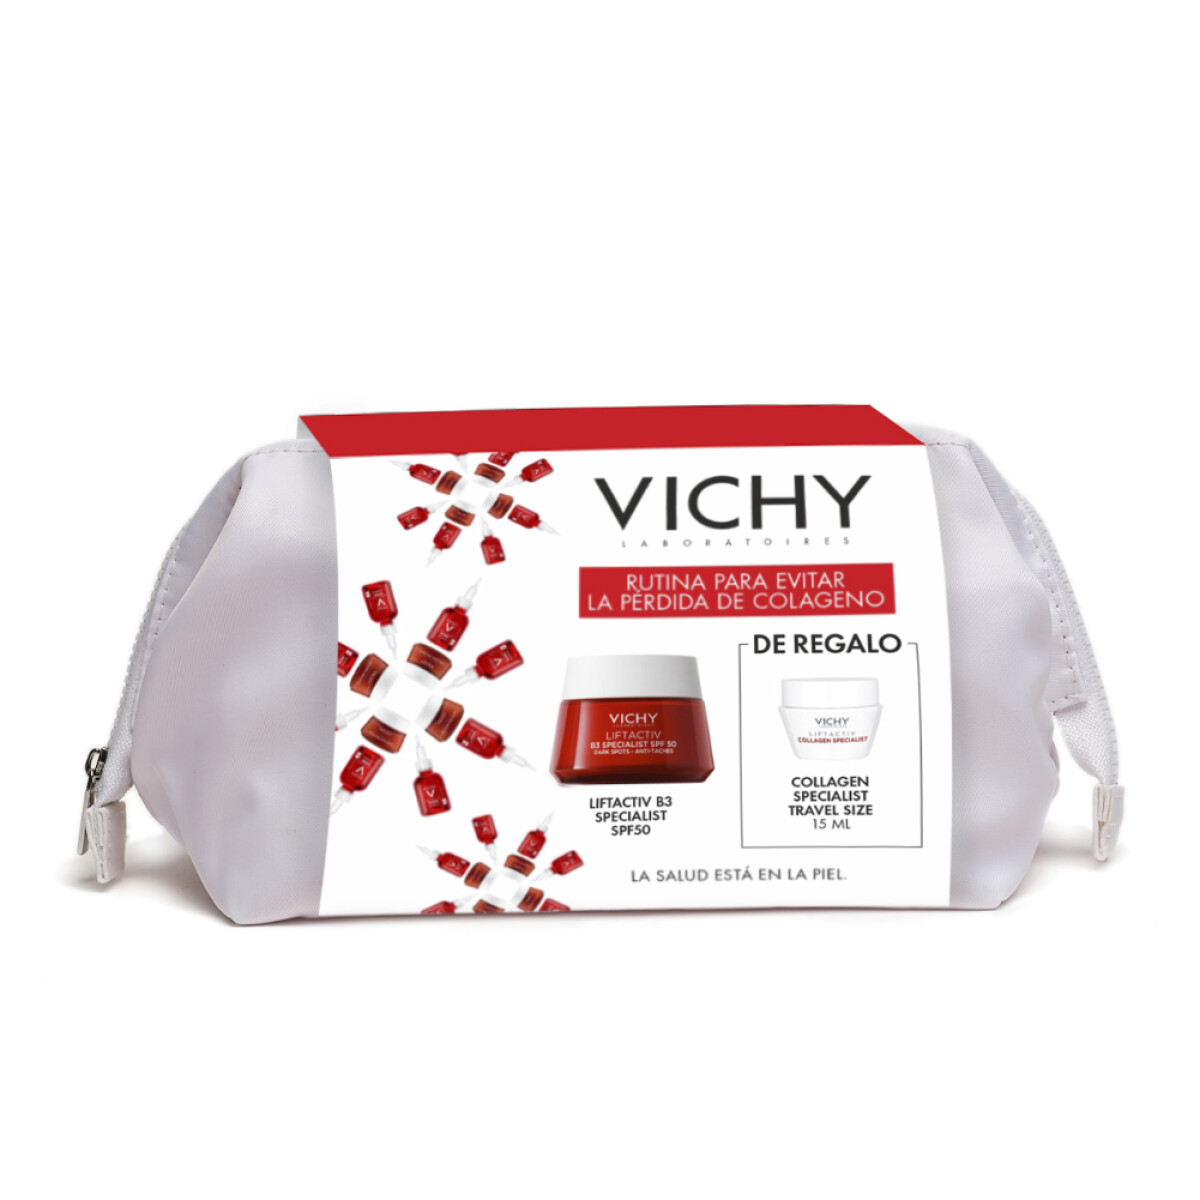 Pack Vichy Liftactiv B3 Specialist SPF50 + L Collagen - 001 